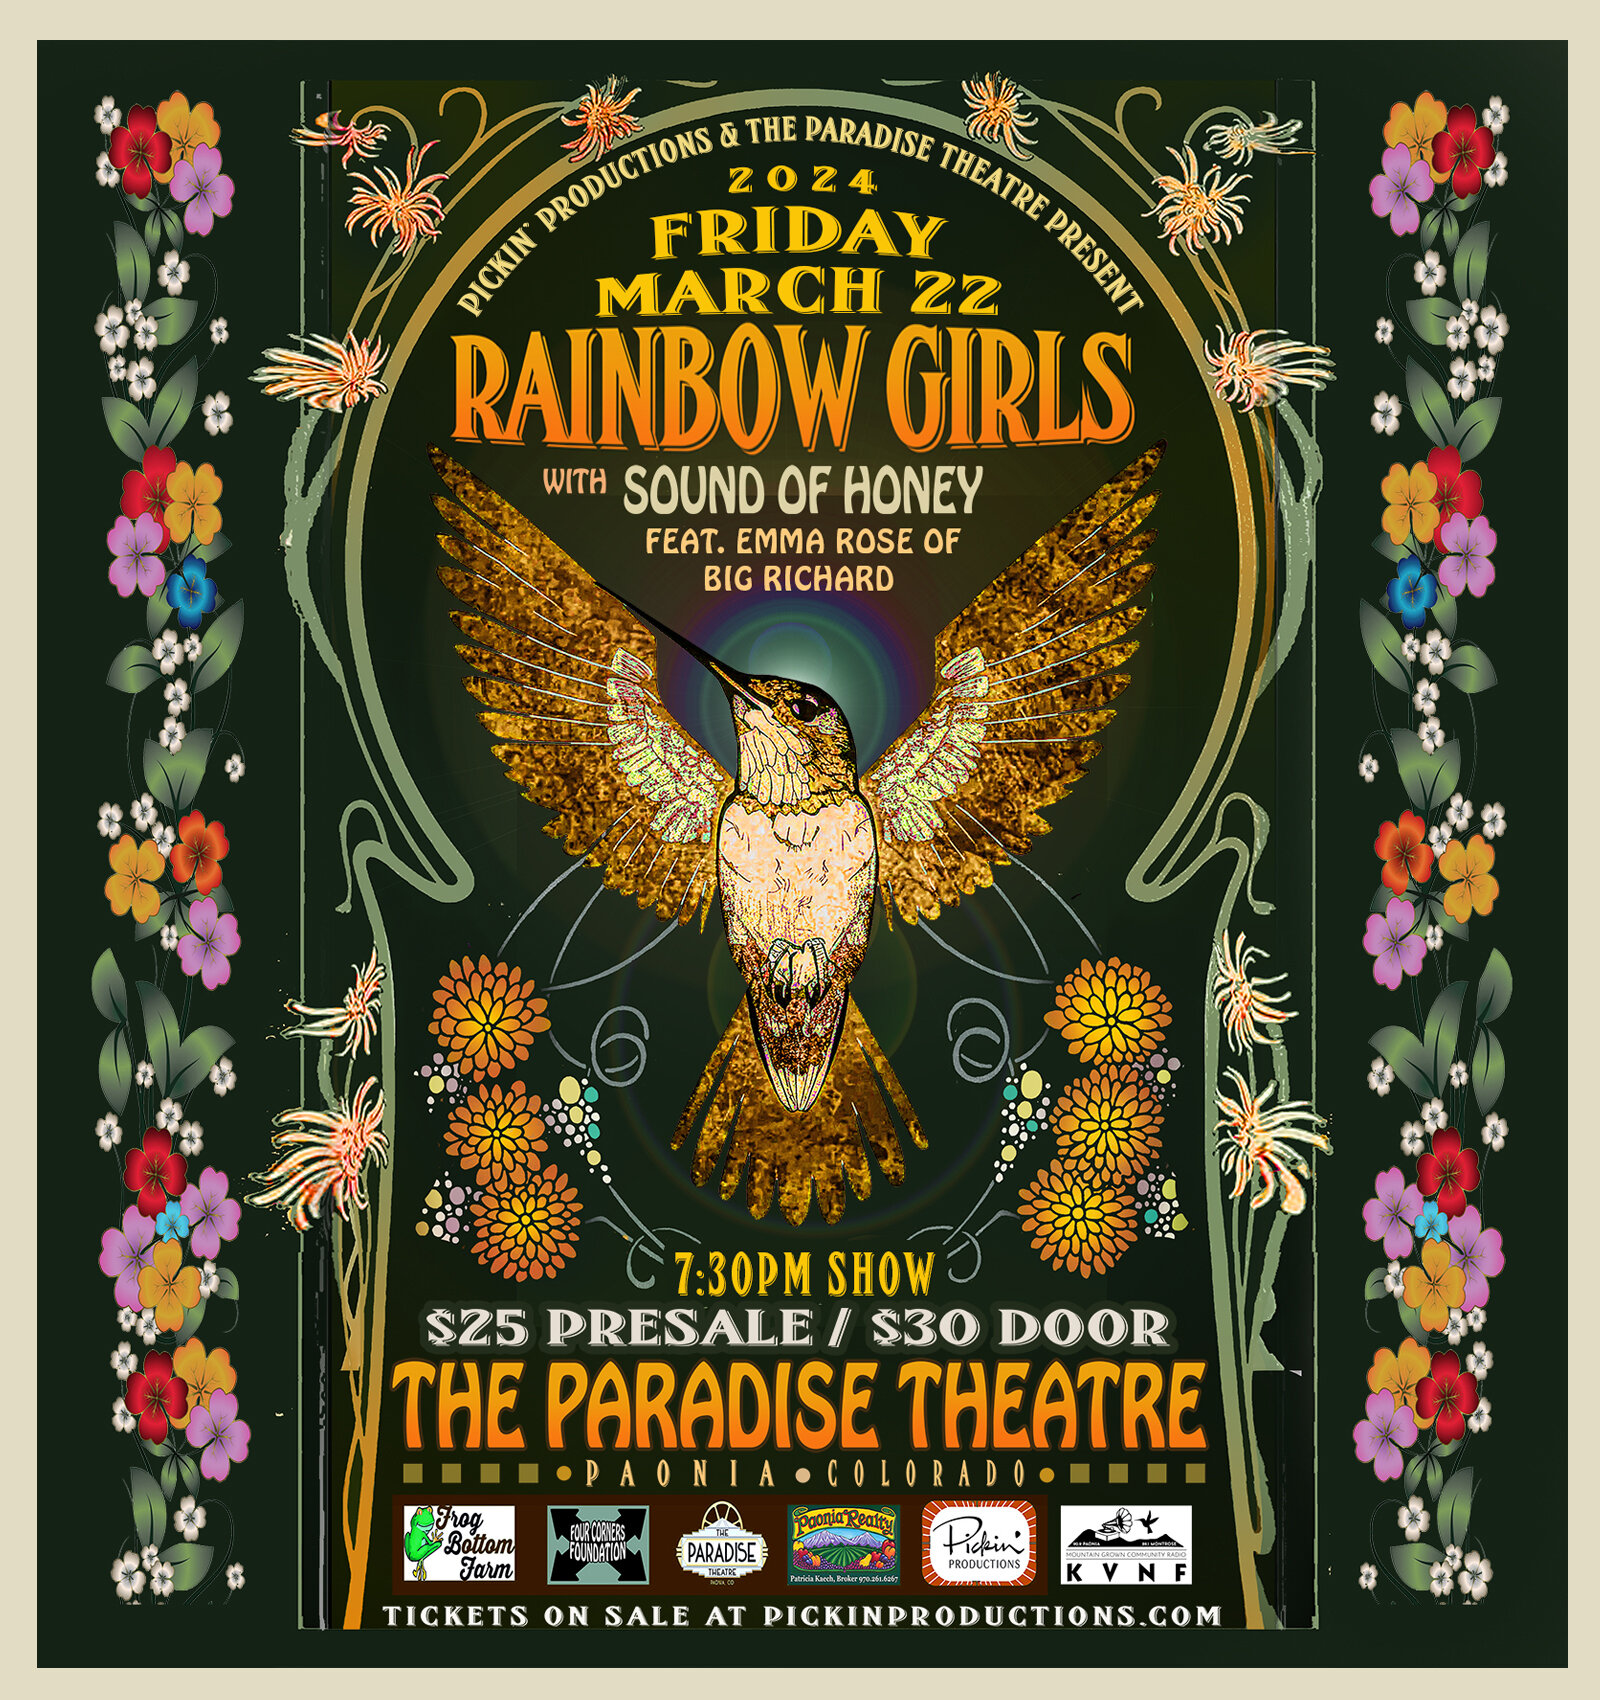 Pickin' Productions and @paradisepaonia  present @rainbowgirlsband with @soundofhoney (Emma Rose formerly of Big Richard) on Friday, March 22nd at Paradise Theatre of Paonia.

Rainbow Girls are &quot;A gang of sweet angels punching you in the heart.&